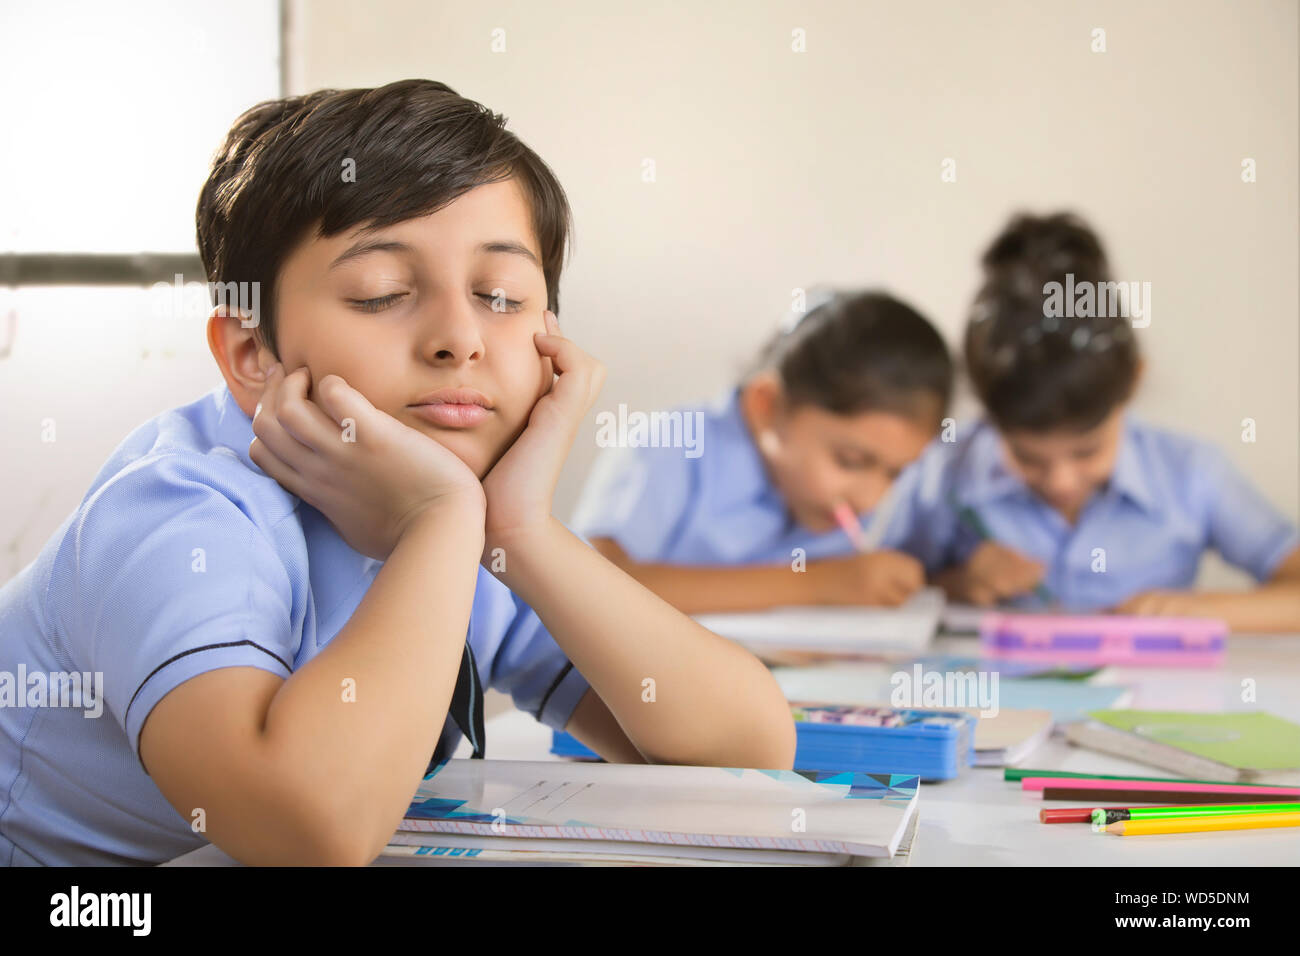 school boy sitting with eyes closed in class Stock Photo